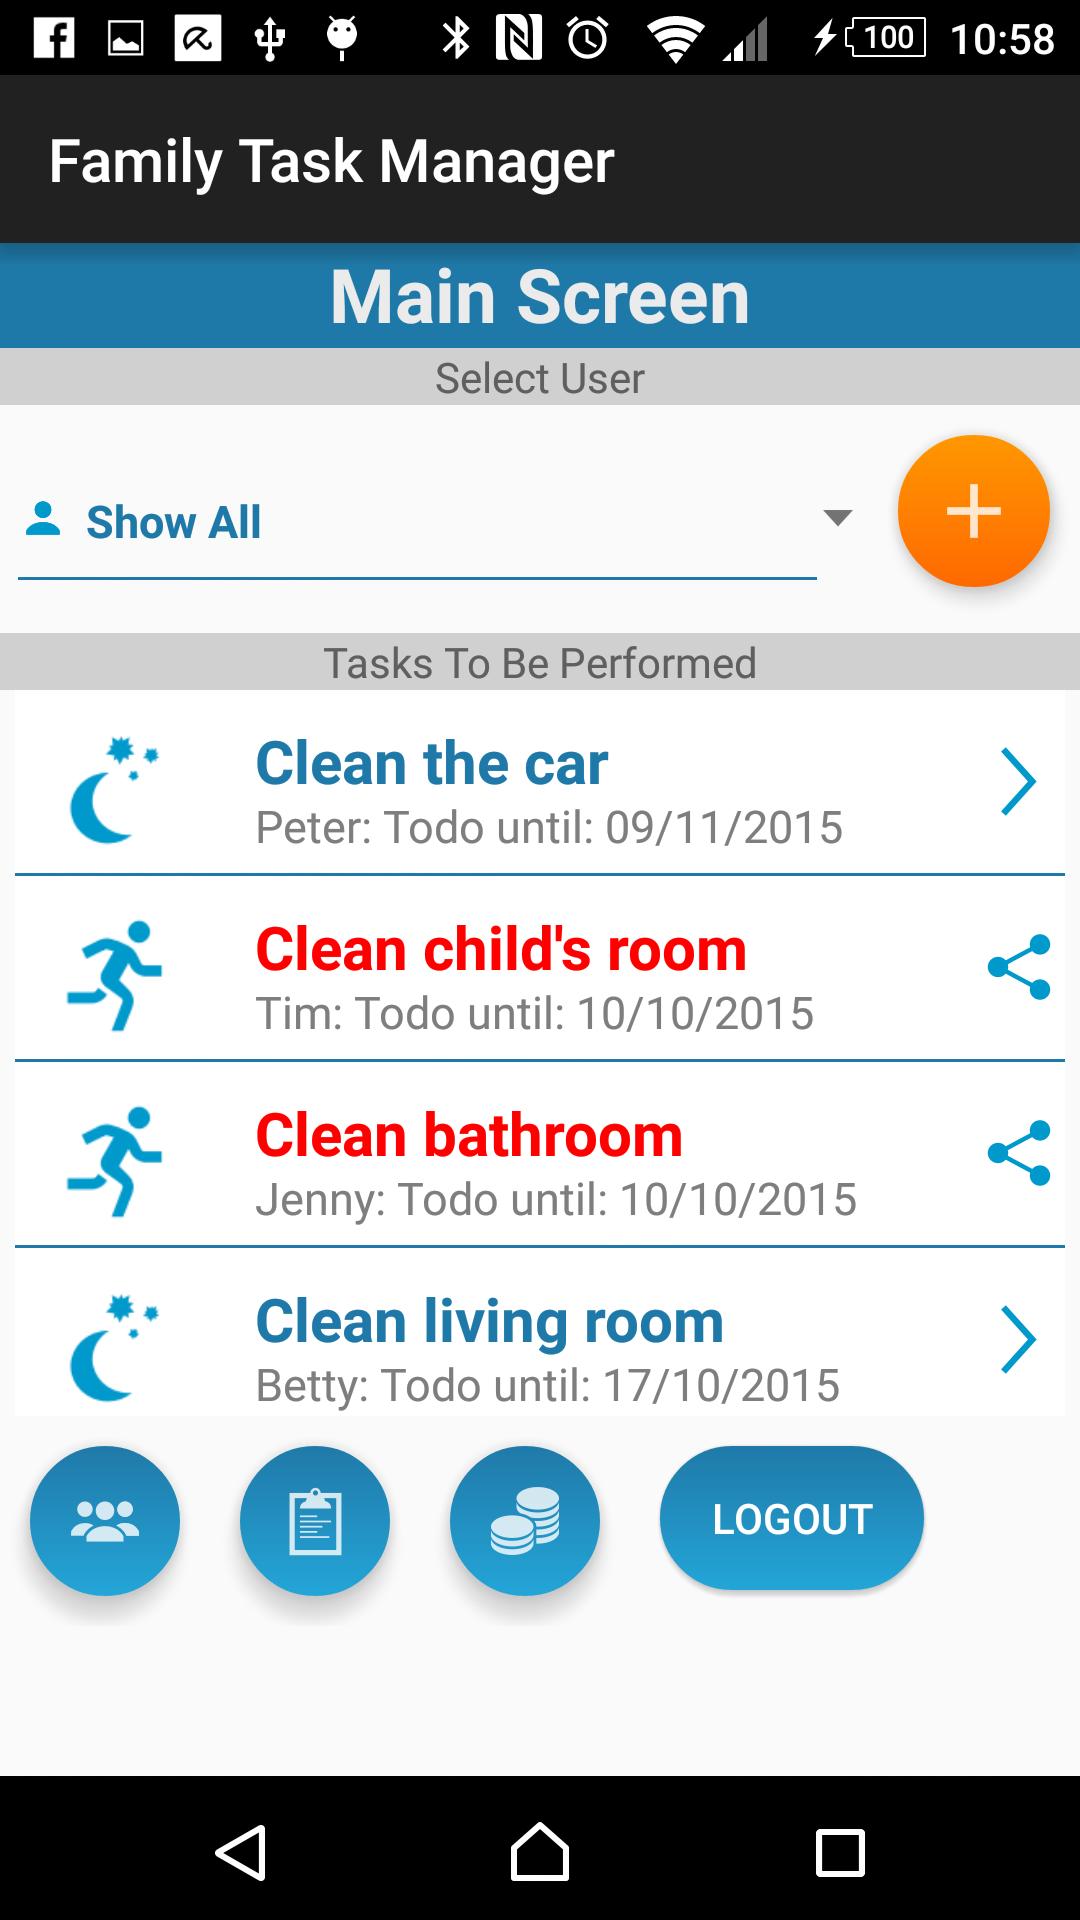 Family Task Manager for Android - APK Download